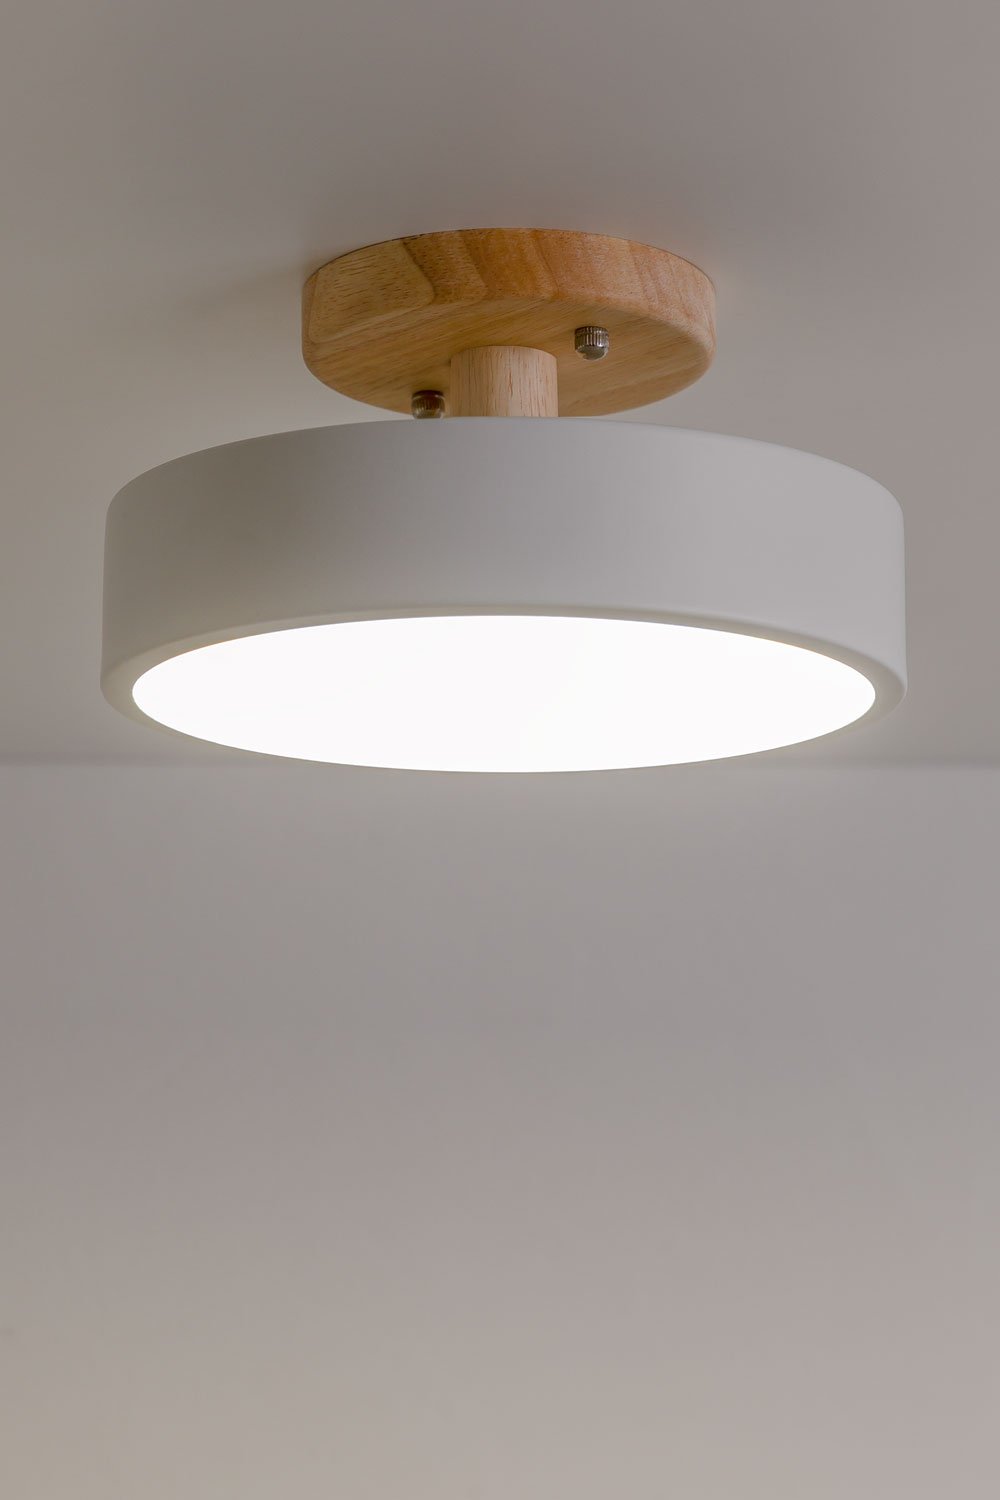 LED ceiling light Zico, gallery image 2